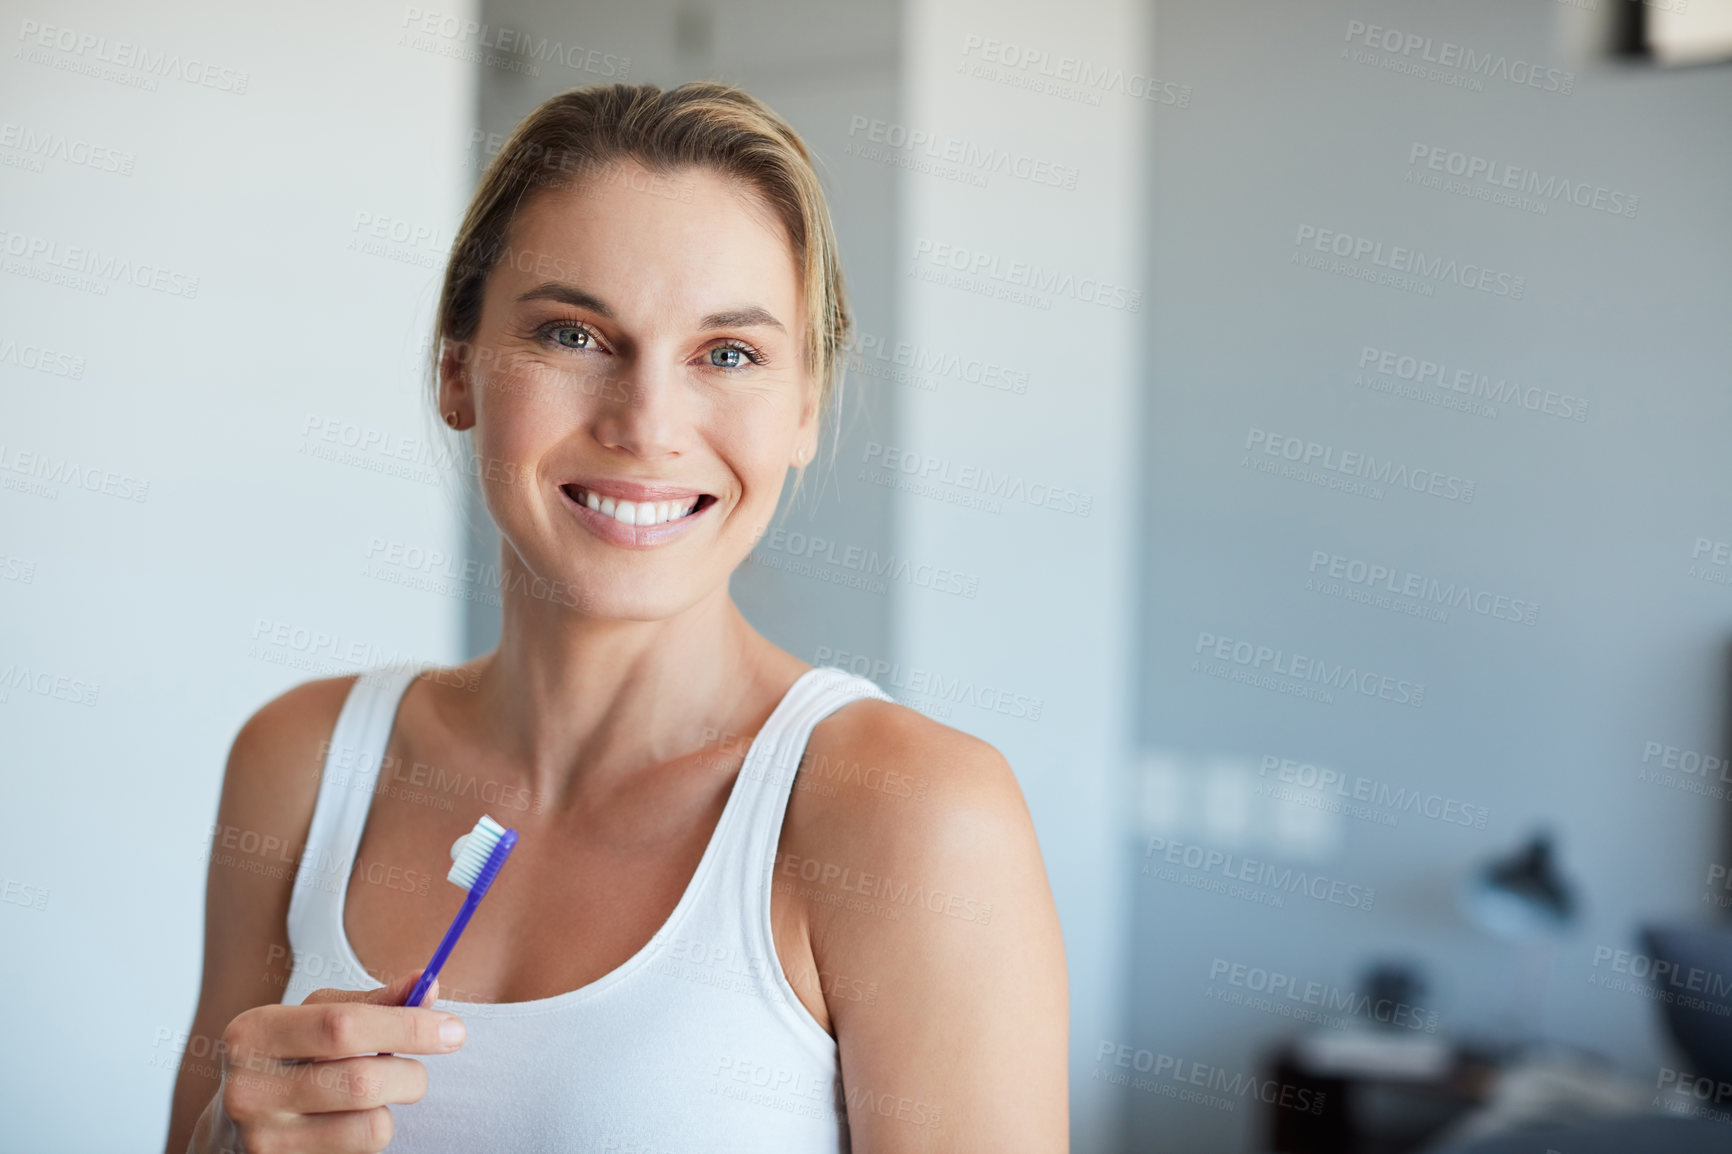 Buy stock photo Cropped portrait of an attractive young woman holding a toothbrush at home